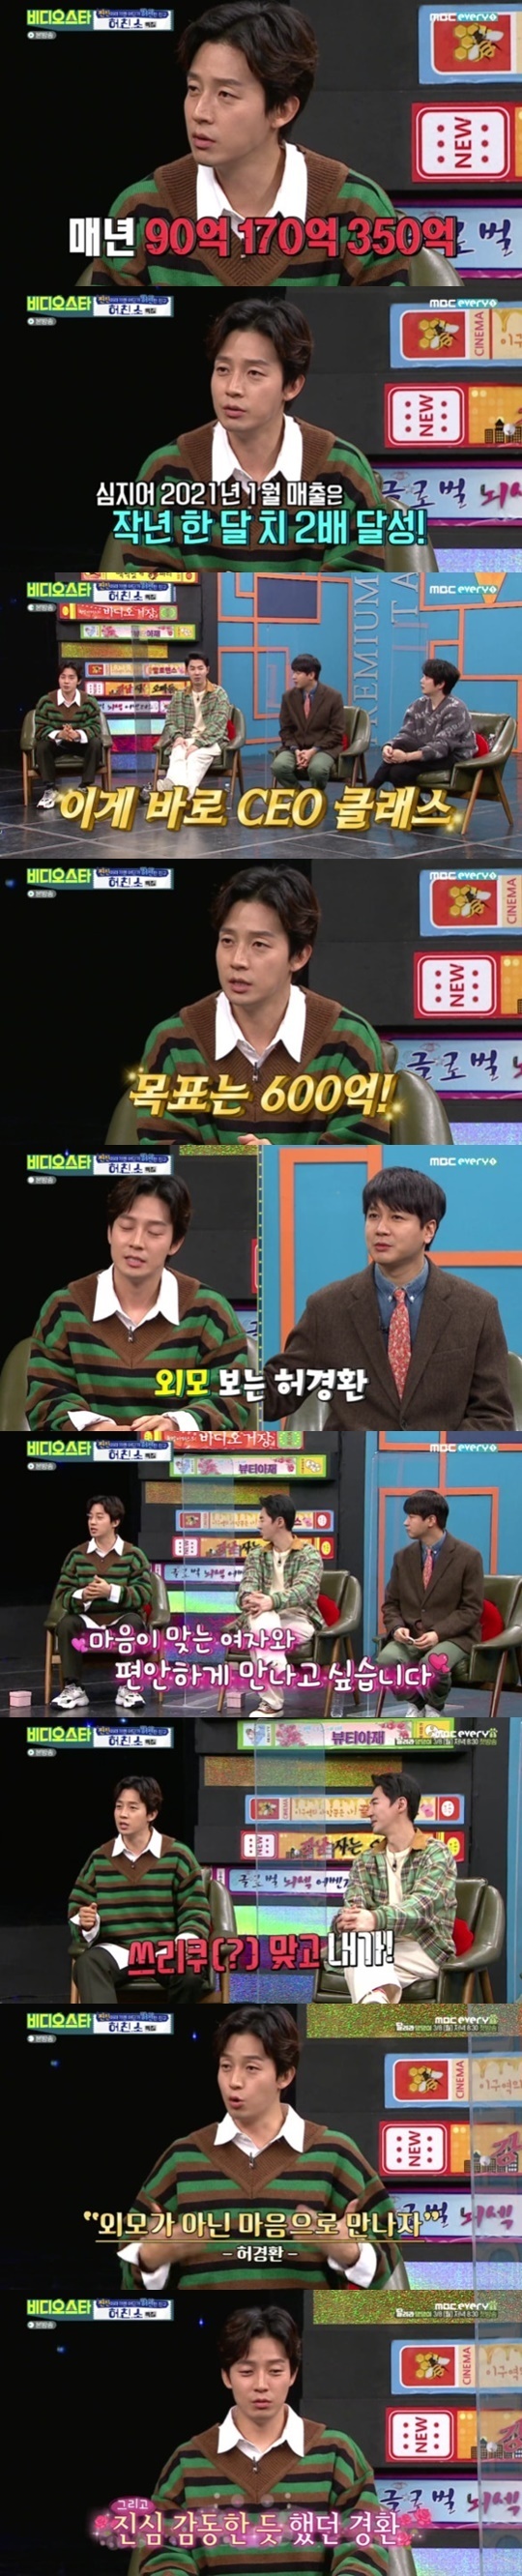 ‘Video Star’ Heo Gyeong-hwan, targets 60 billion won in business sales this year…  Until the ideal confession (general)